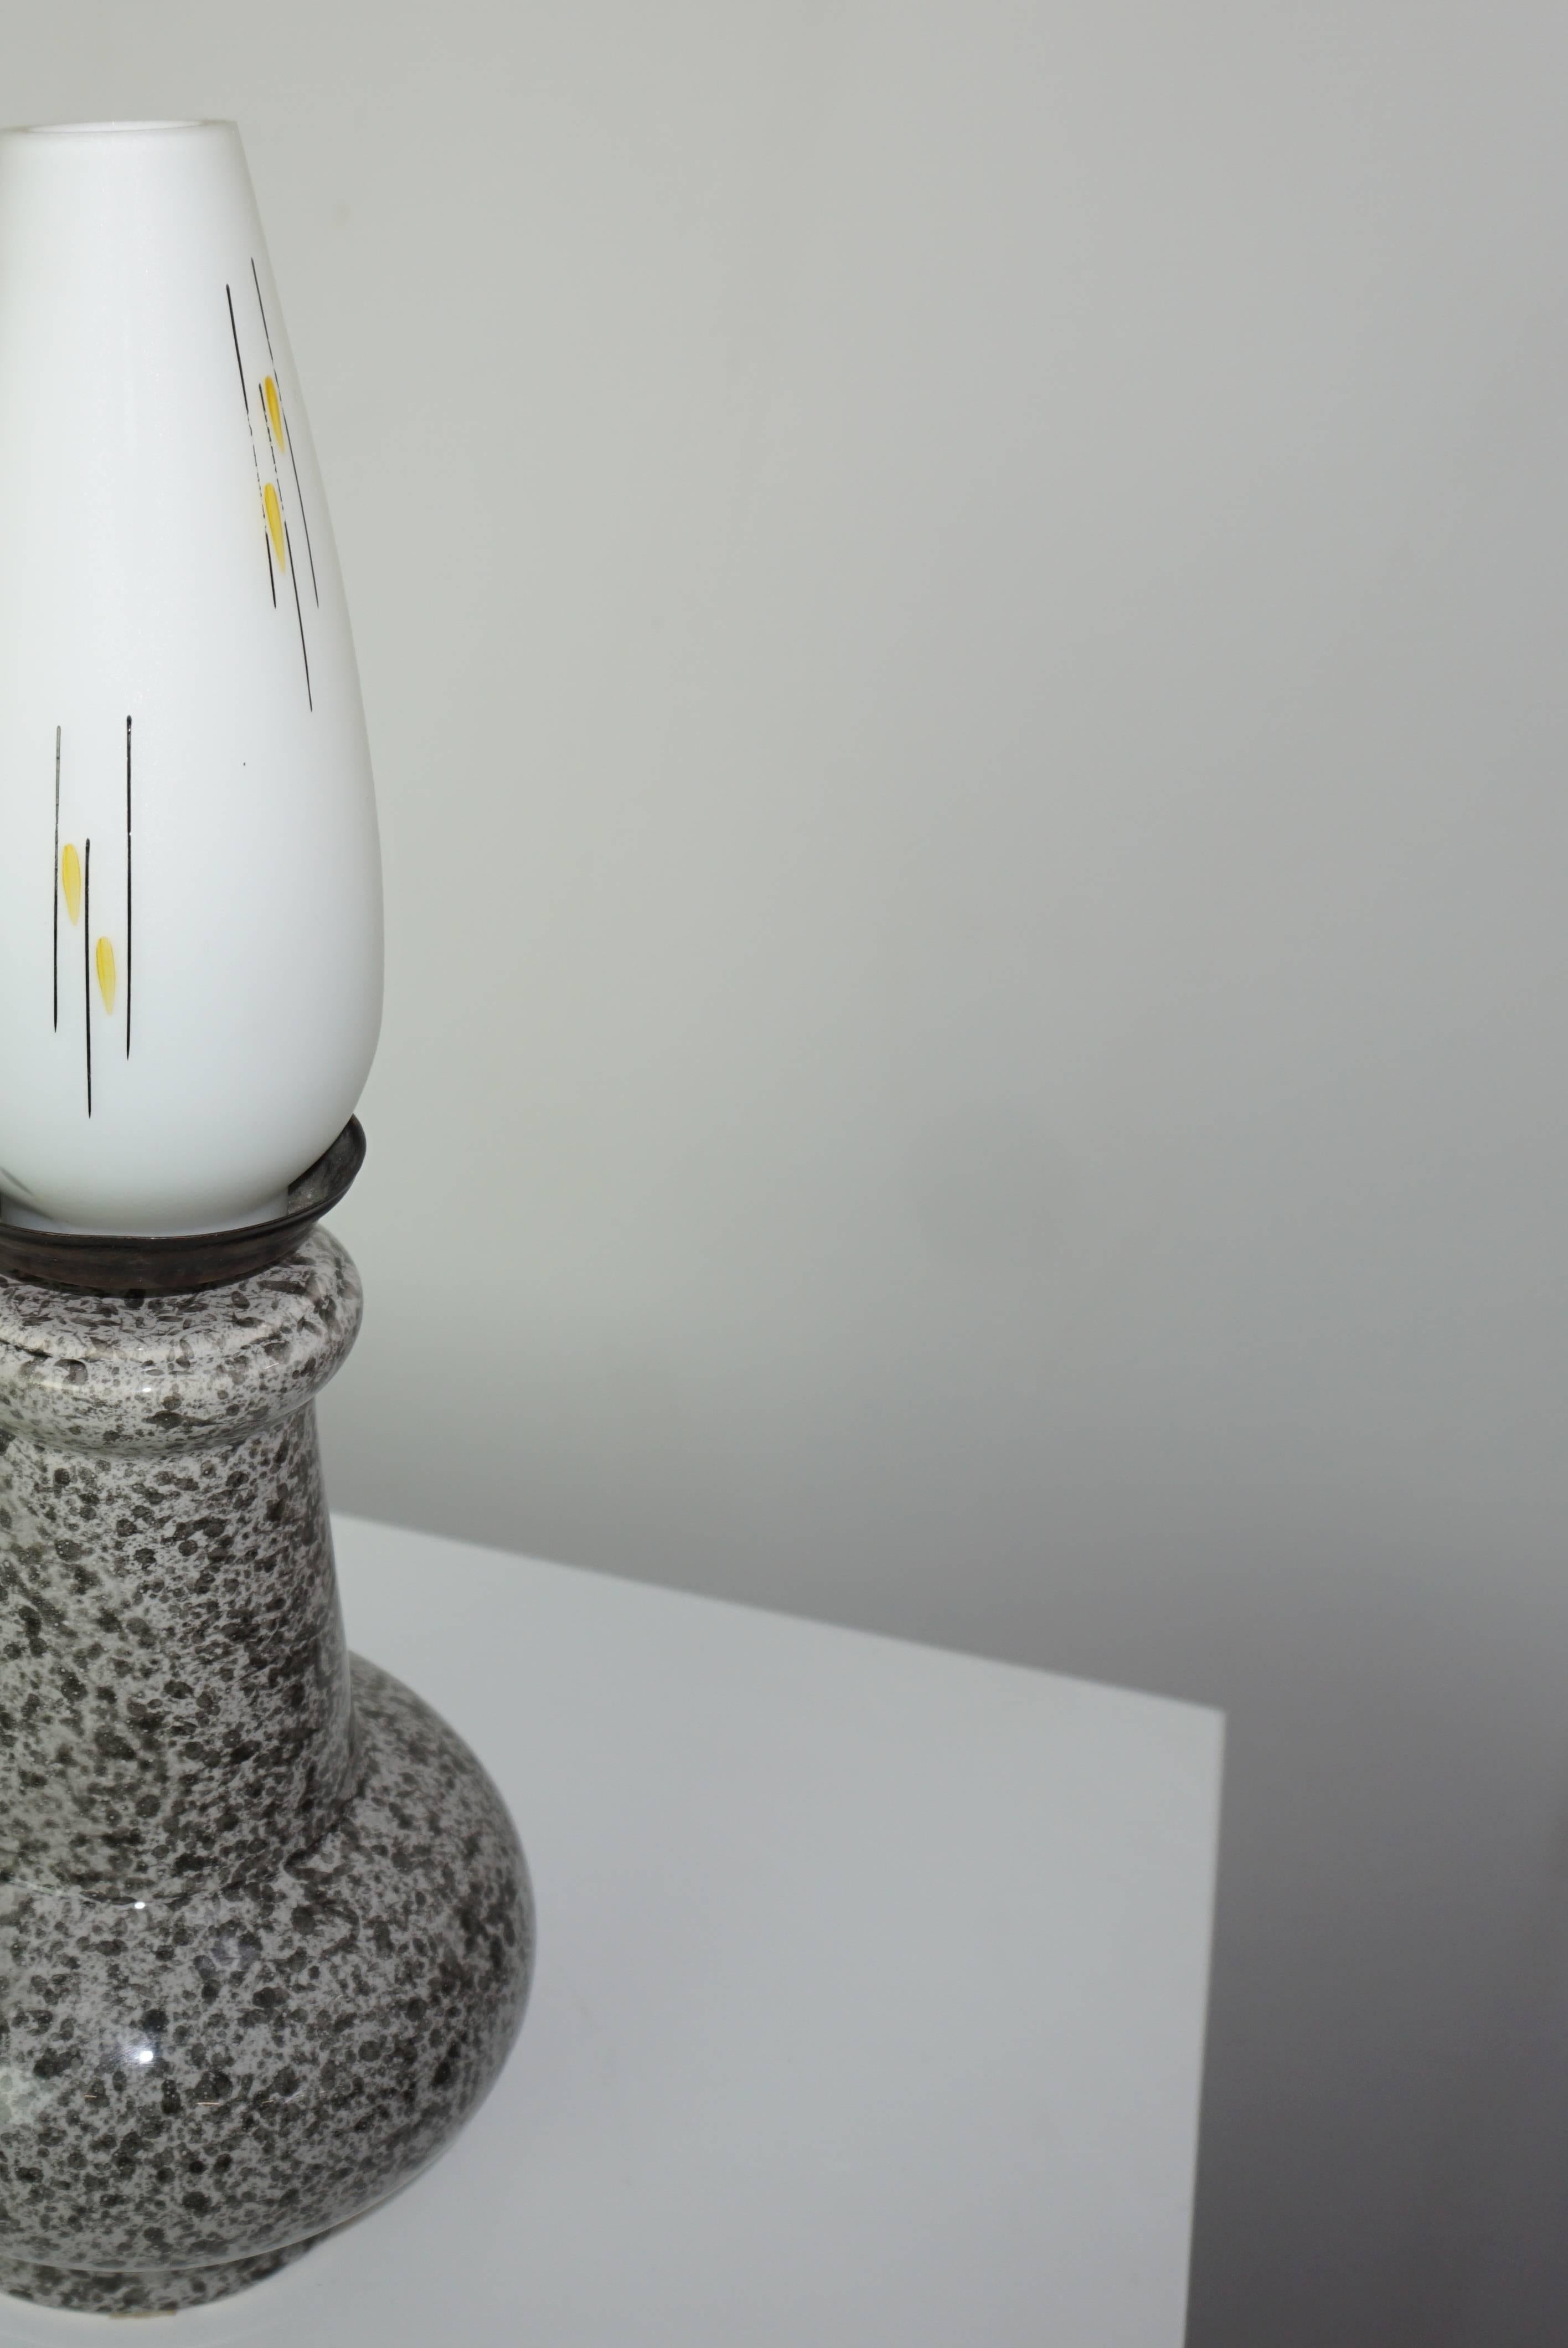 Adorable 1950s table lamp in gray ceramic speckled and white opaline subtly crafted.